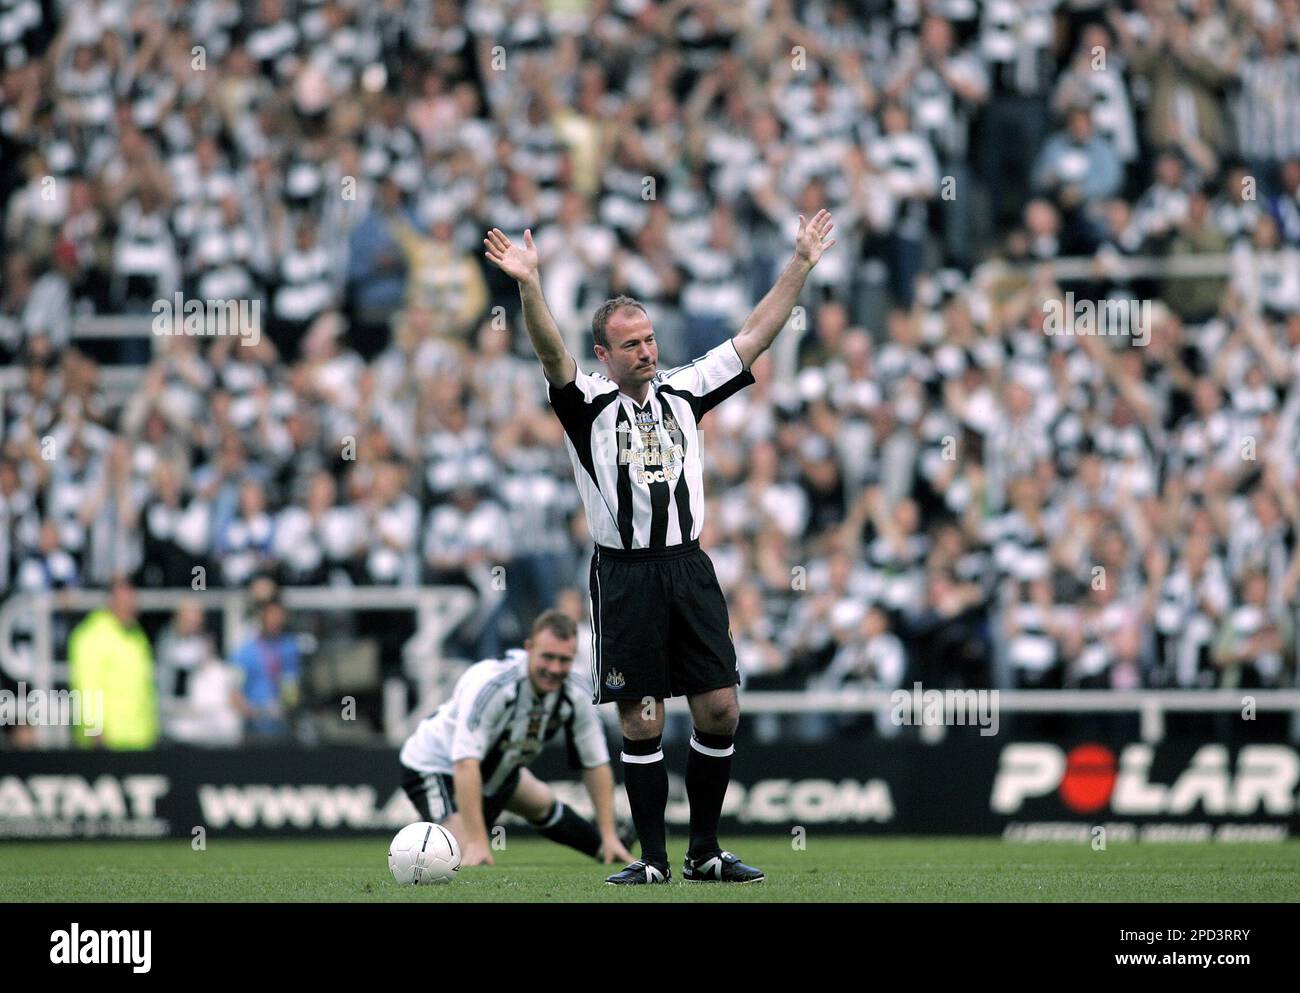 Newcastle's Alan Shearer waves to the crowd at his final appearance in a Newcastle  shirt during his testimonial soccer match at St James' Park, Newcastle,  England. Thursday May. 11, 2006. Shearer pulled